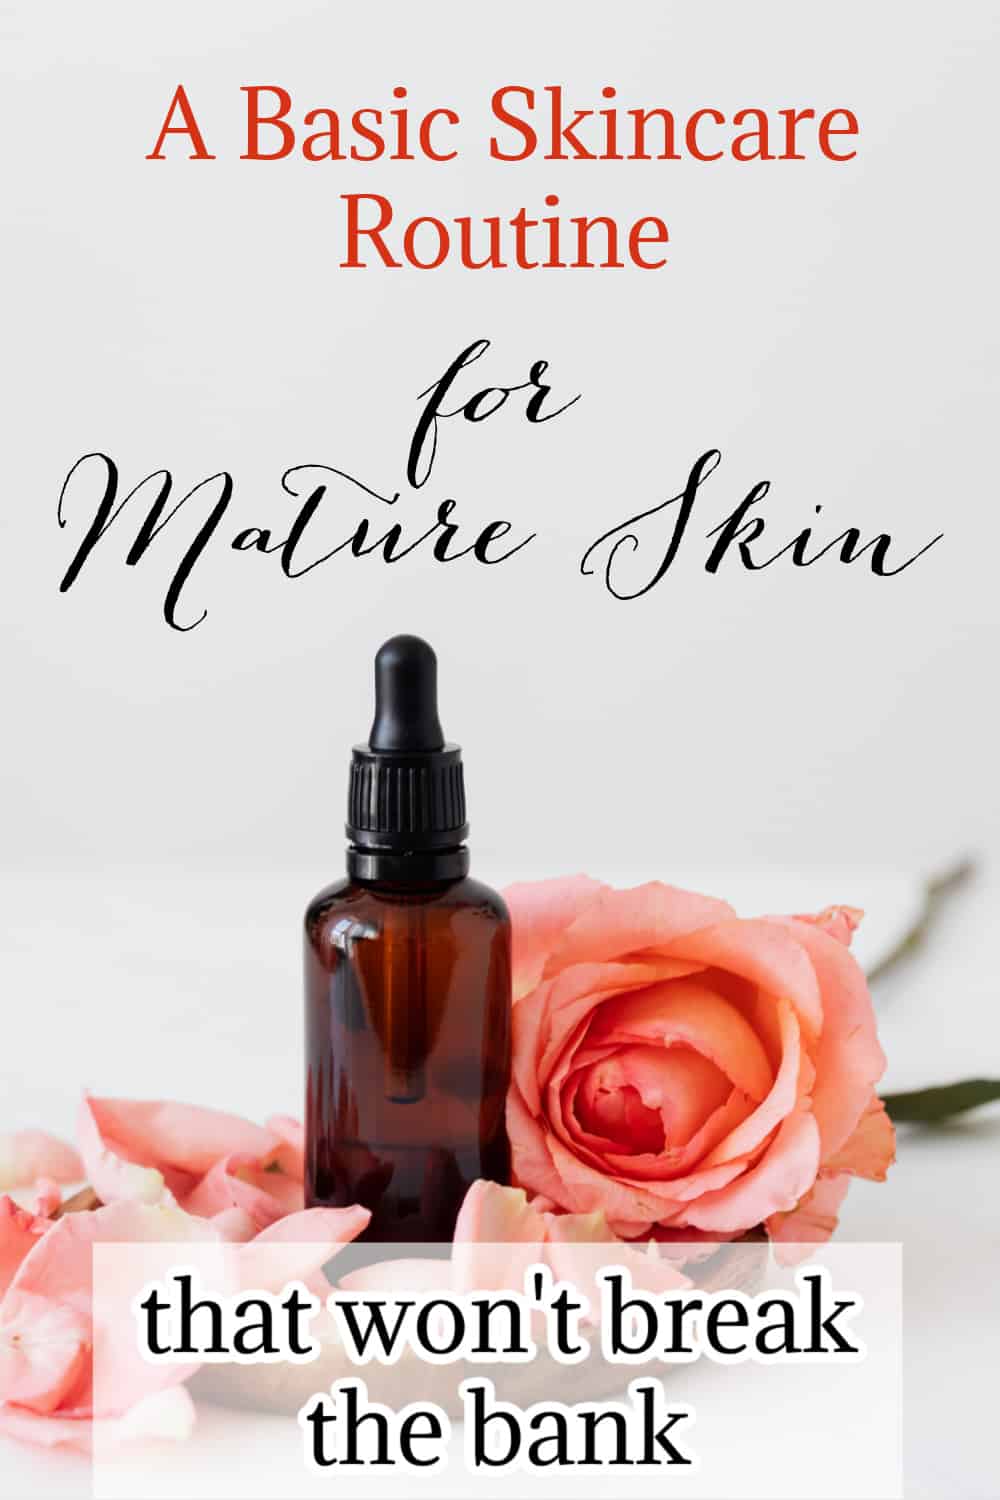 A Basic Skin Care Routine for Mature Skin